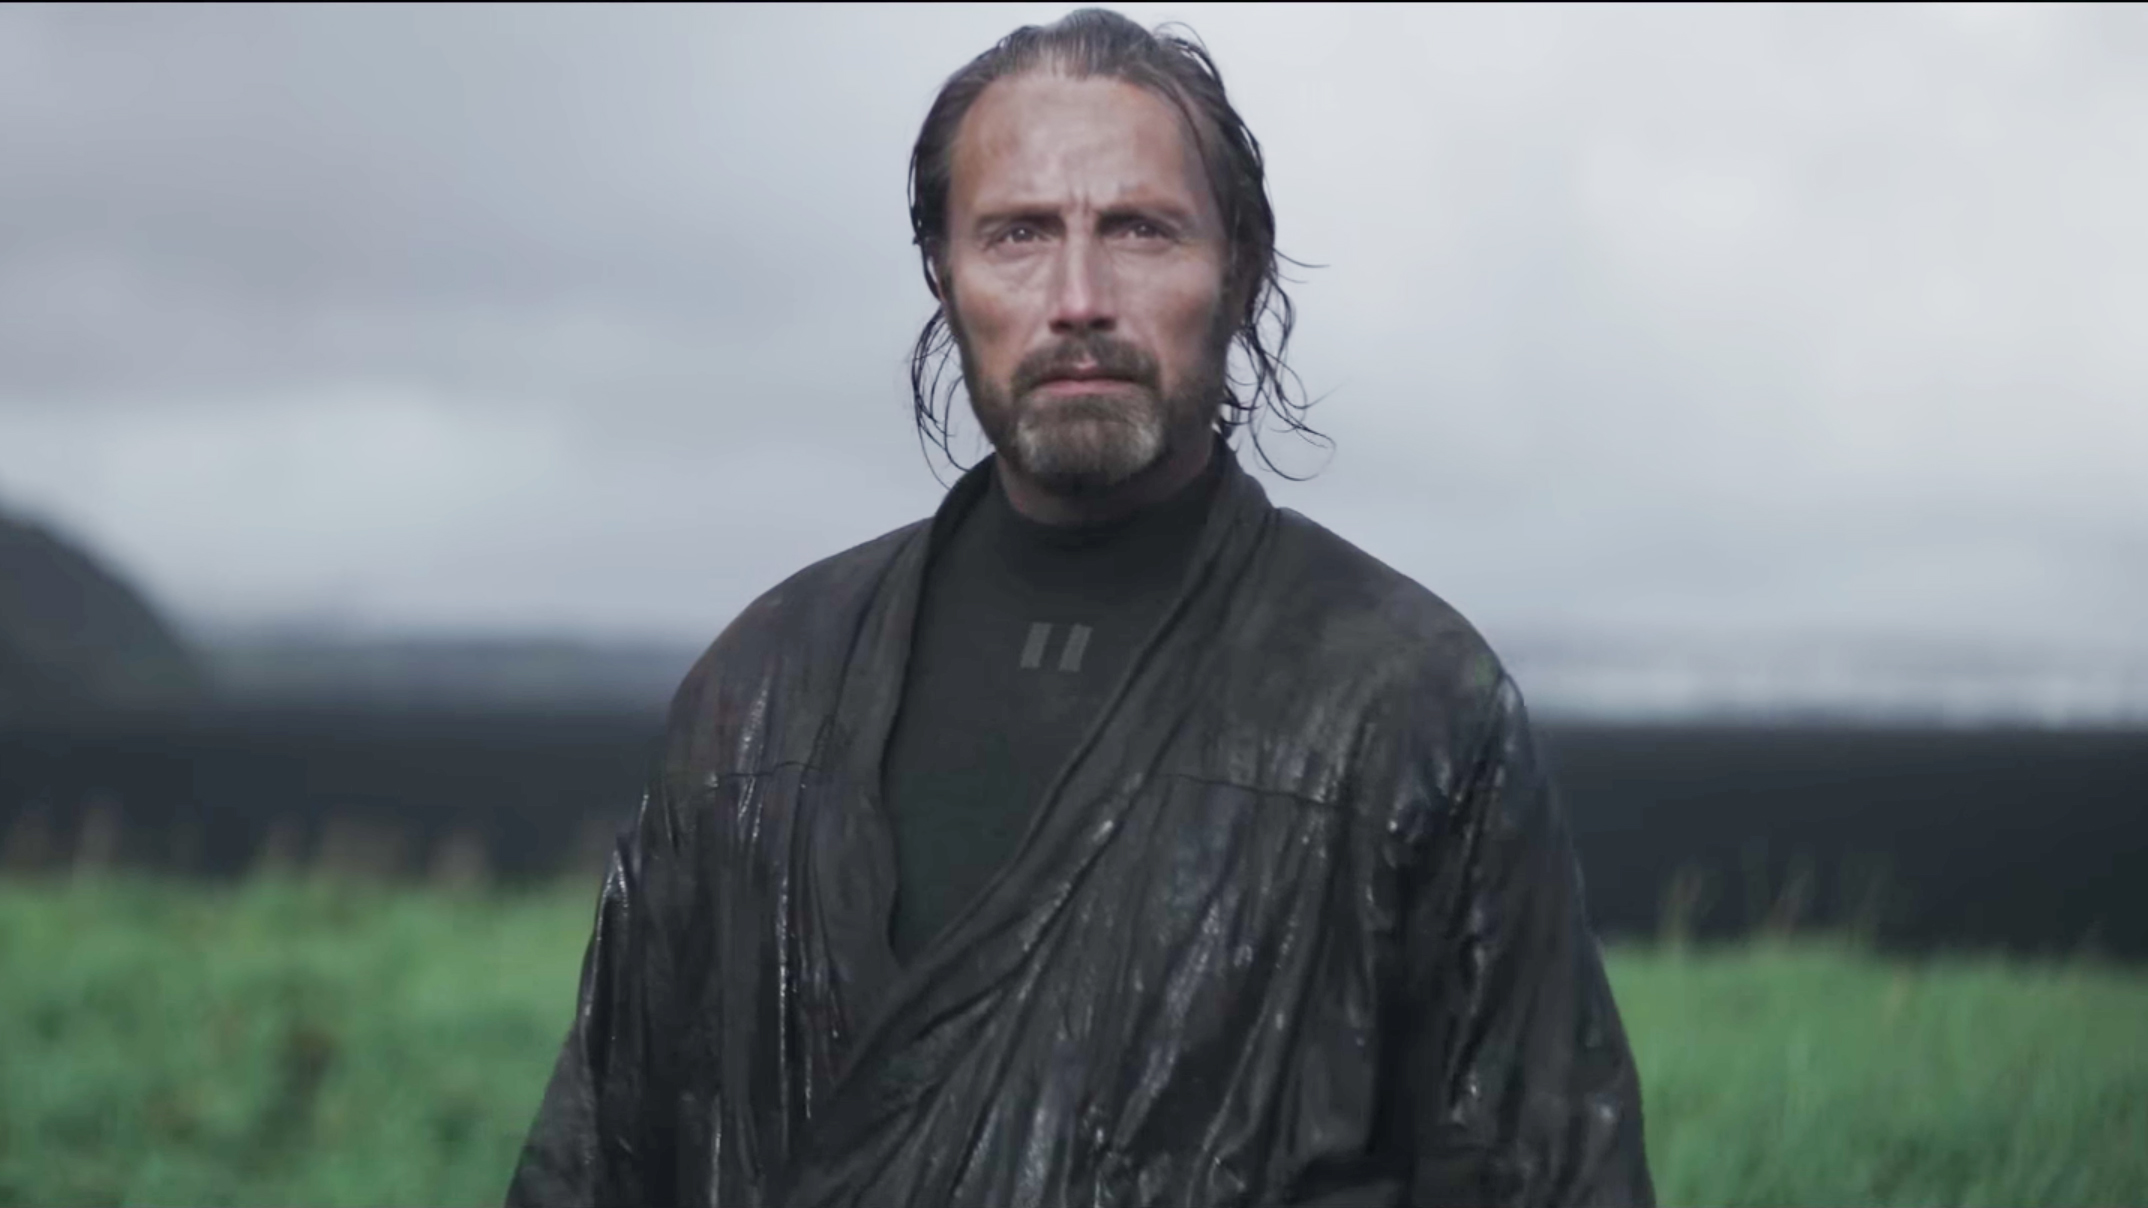 Fantastic Beasts 3: Mads Mikkelsen Has Officially Joined The Cast As Gellert Grindelwald